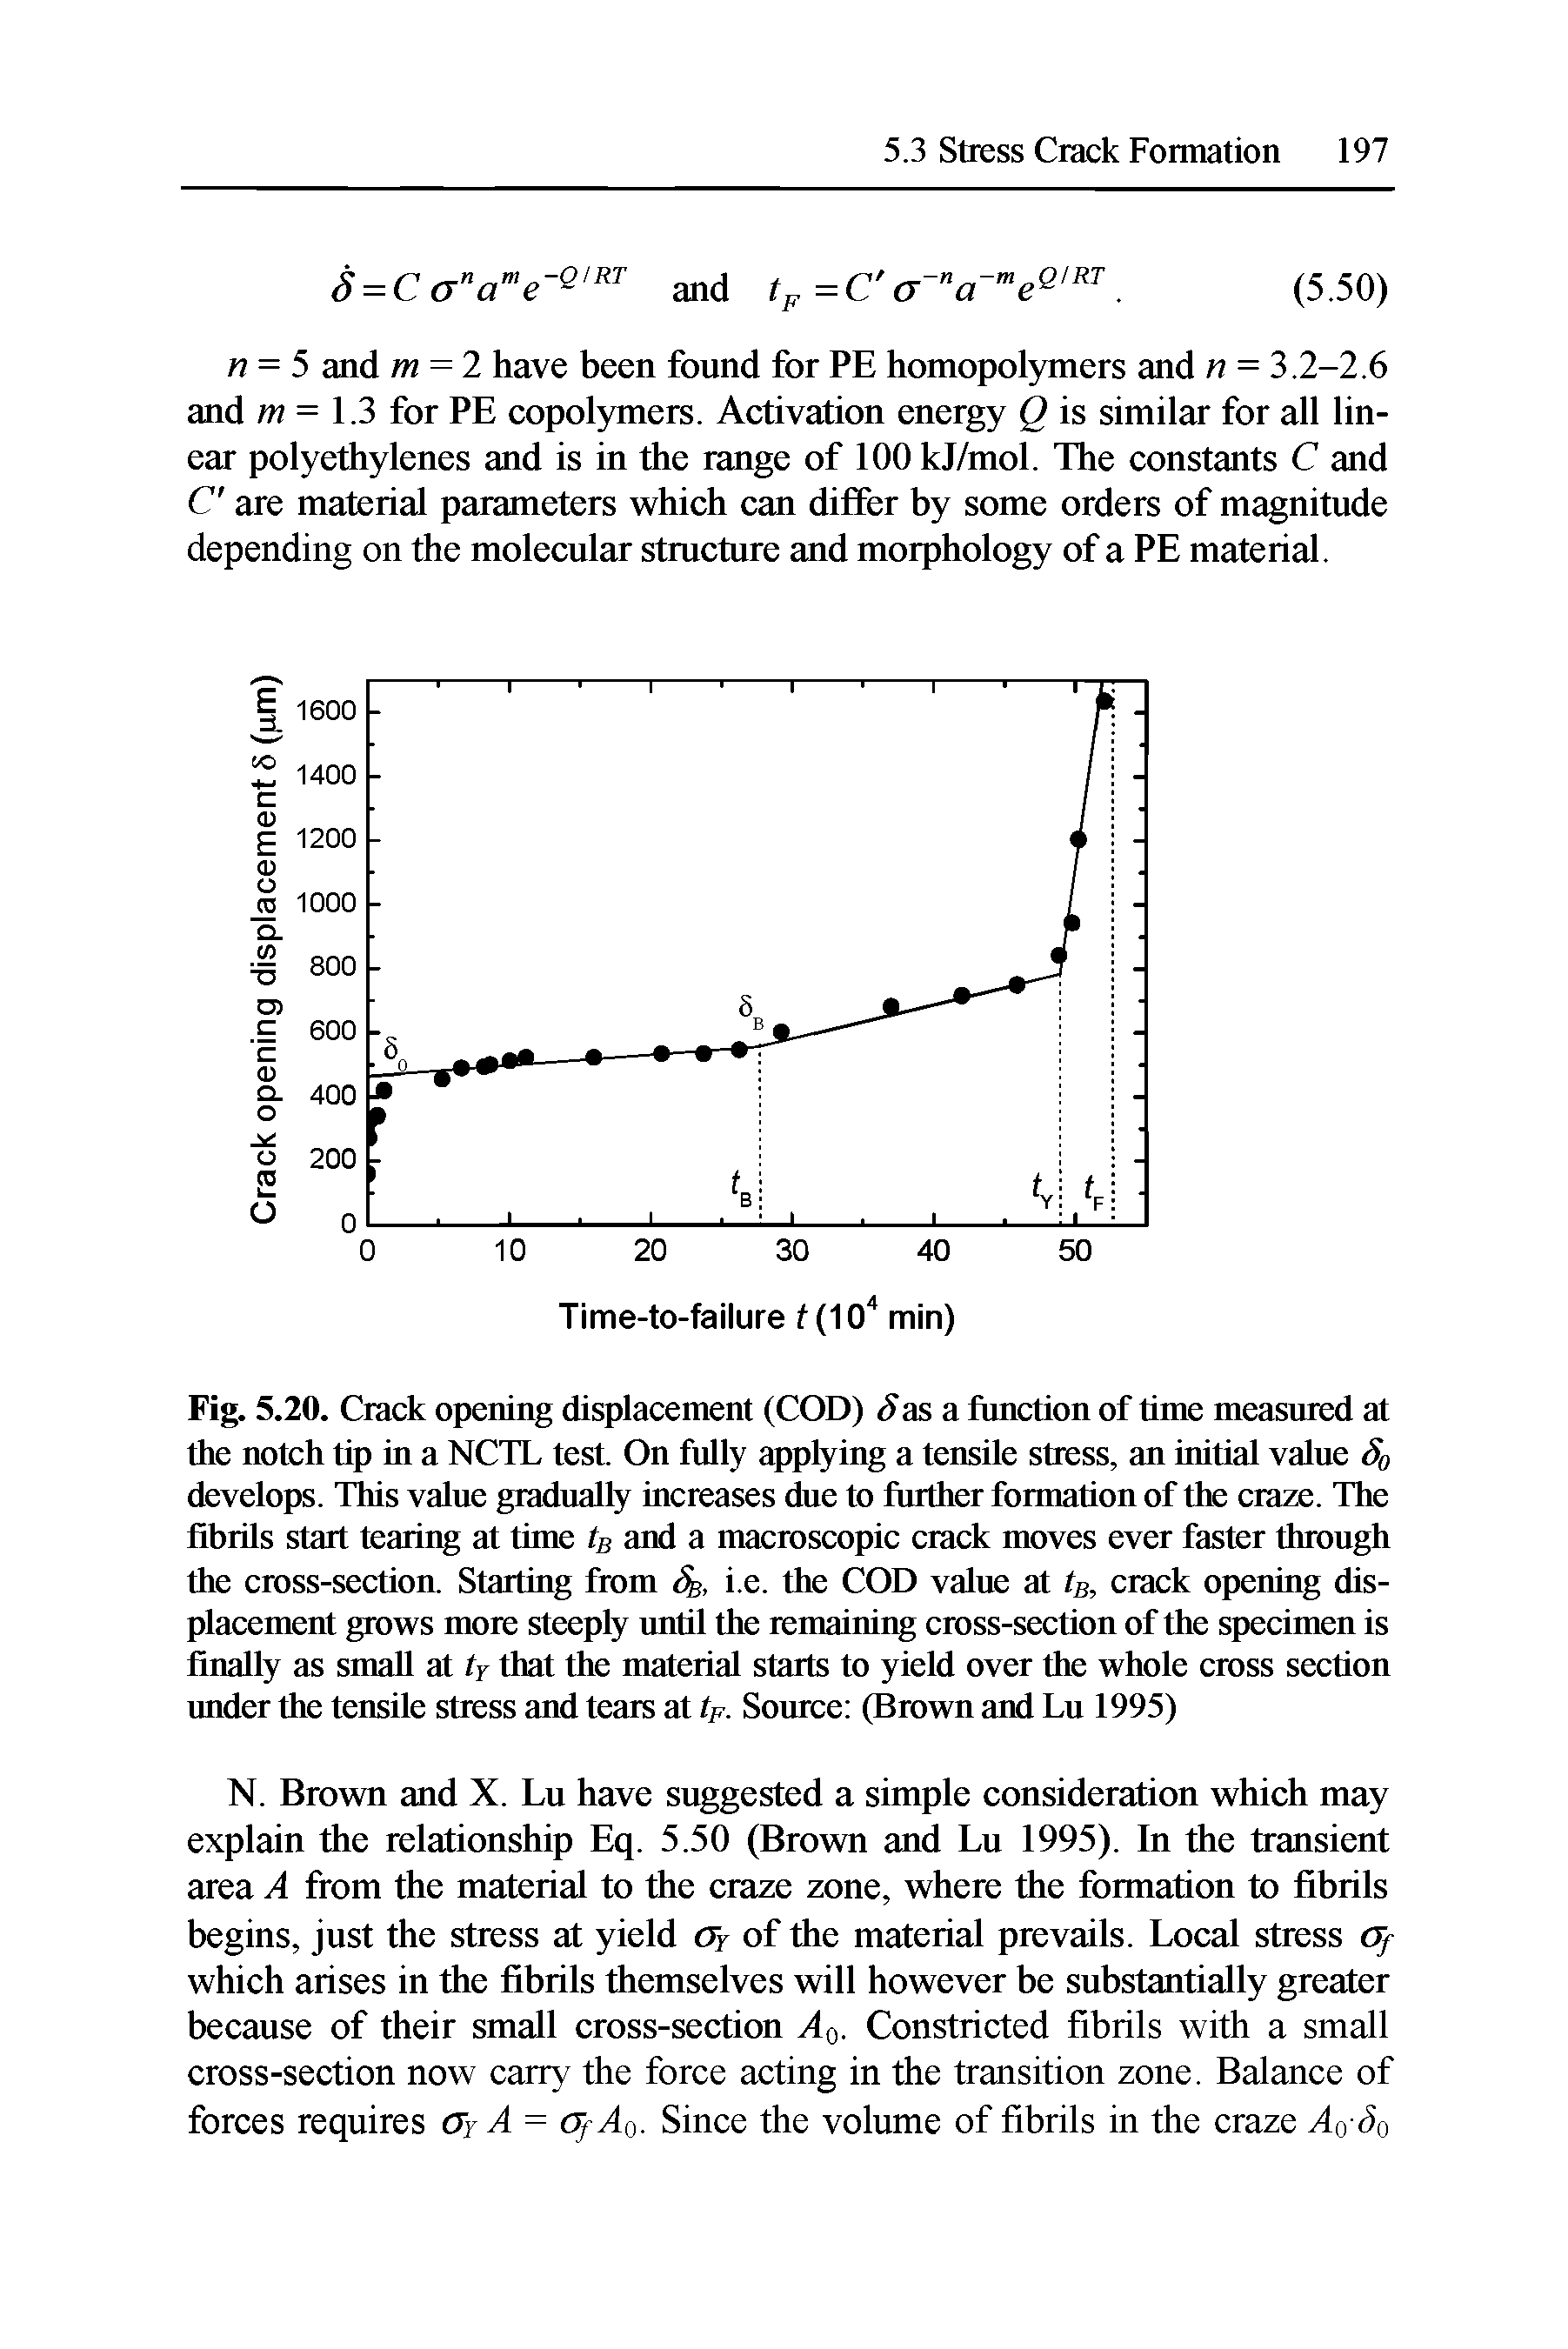 Fig. 5.20. Crack opening displacement (COD) <Jas a function of time measured at the notch tip in a NCTL test On fully applying a tensile stress, an initial value So develops. This value gradually increases due to further formation of the craze. The fibrils start tearing at time ts and a macroscopic crack moves ever faster through the cross-section. Starting fiom Sb, i.e. the COD value at crack opening displacement grows more steeply until the remaining cross-section of the specimen is finally as small at tj that the material starts to yield over the whole cross section under the tensile stress and tears at tp. Source (Brown and Lu 1995)...